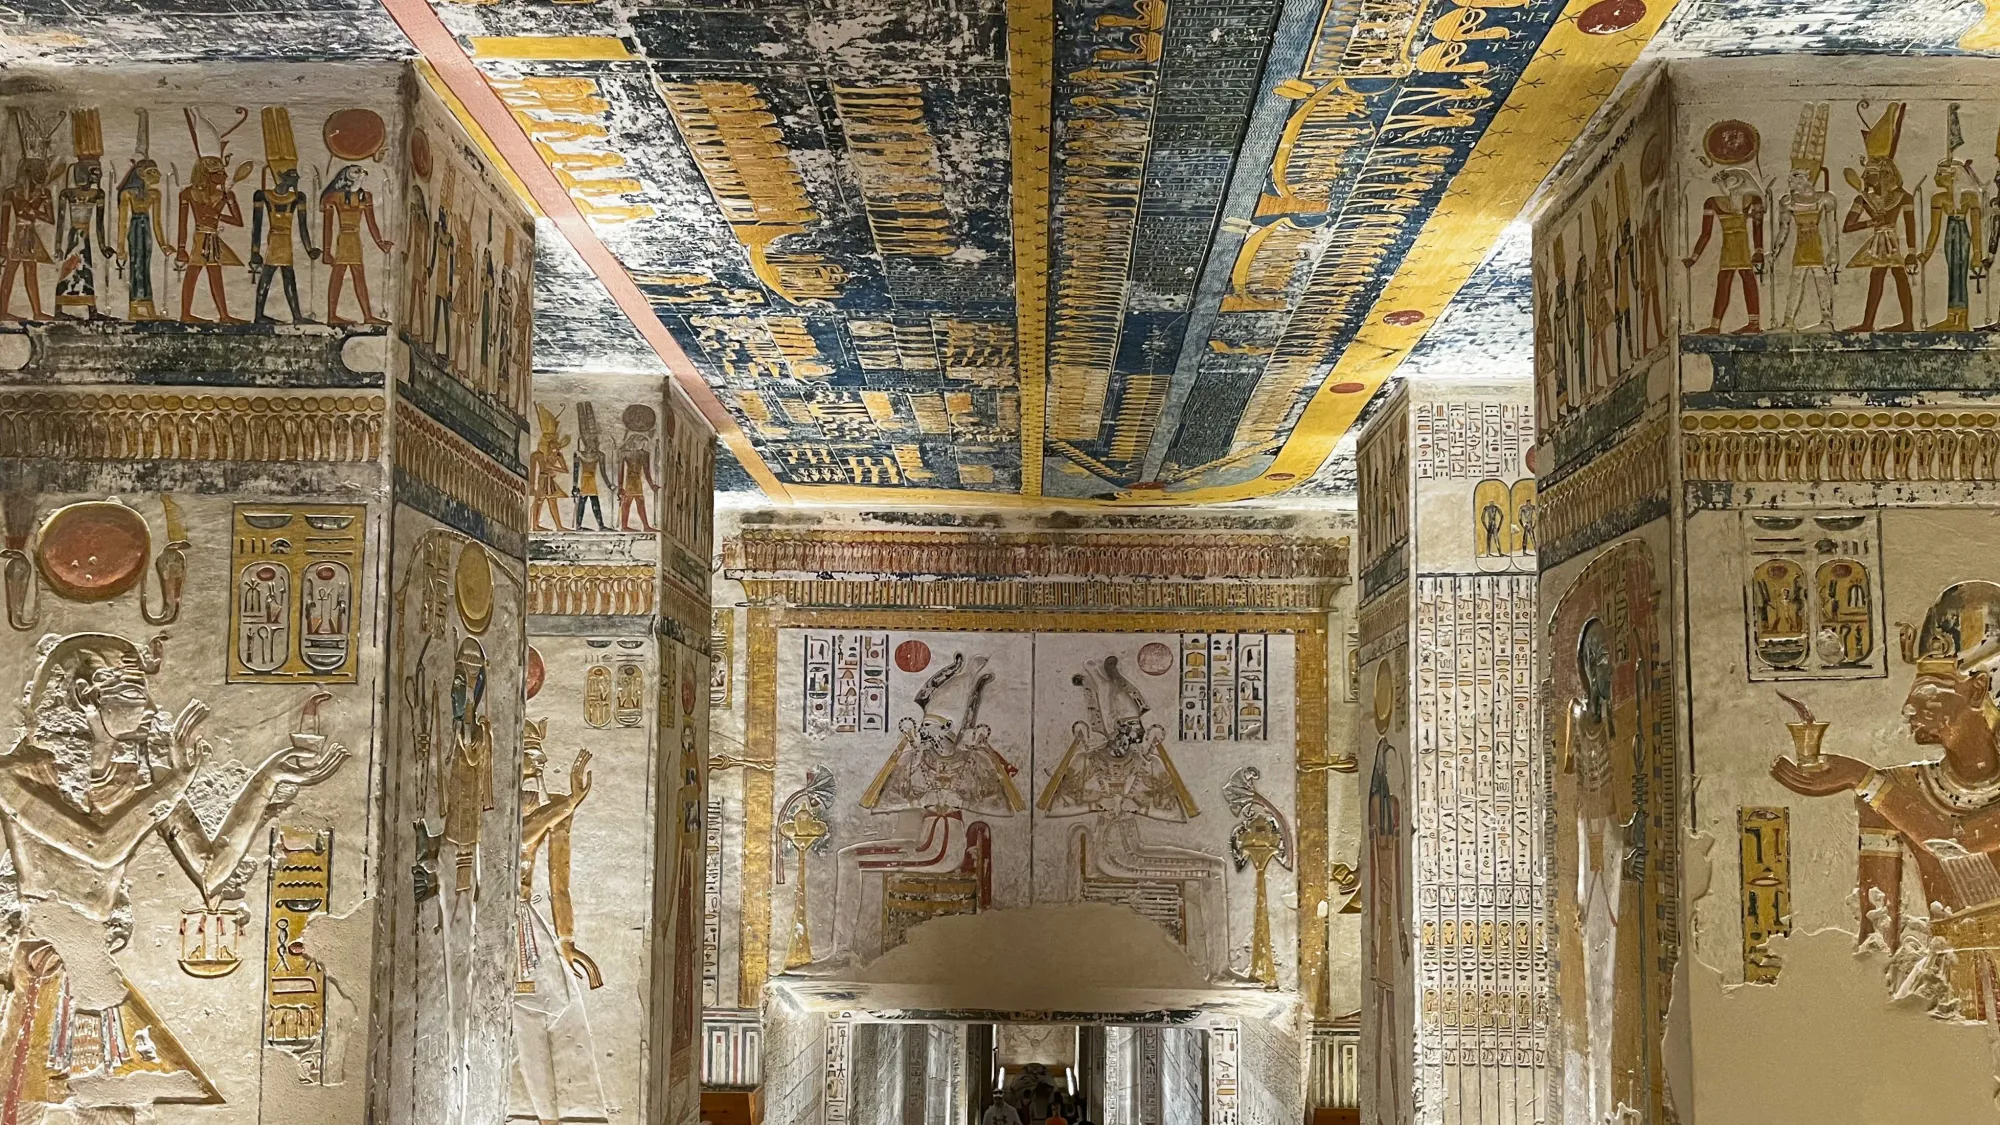 Red, yellow, and blue painted reliefs and hieroglyphics on the walls of the tomb